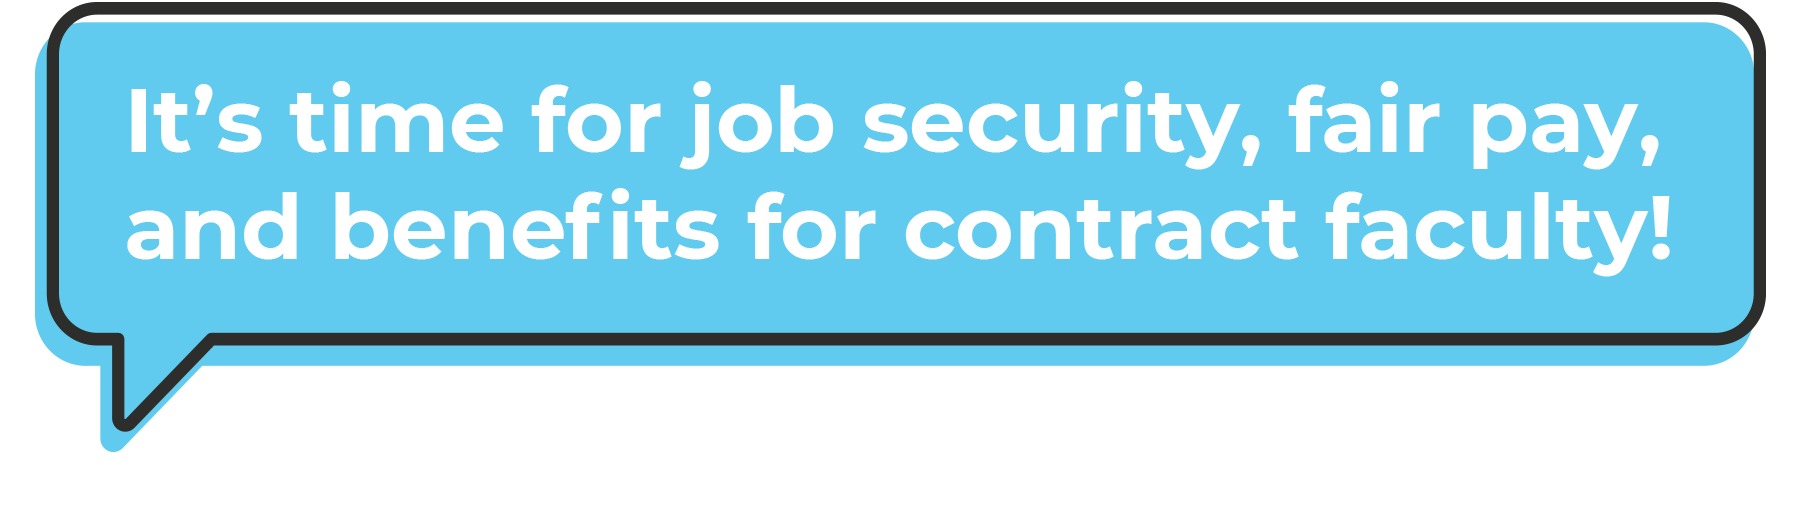 It’s time for job security, fair pay, and benefits for contract faculty!